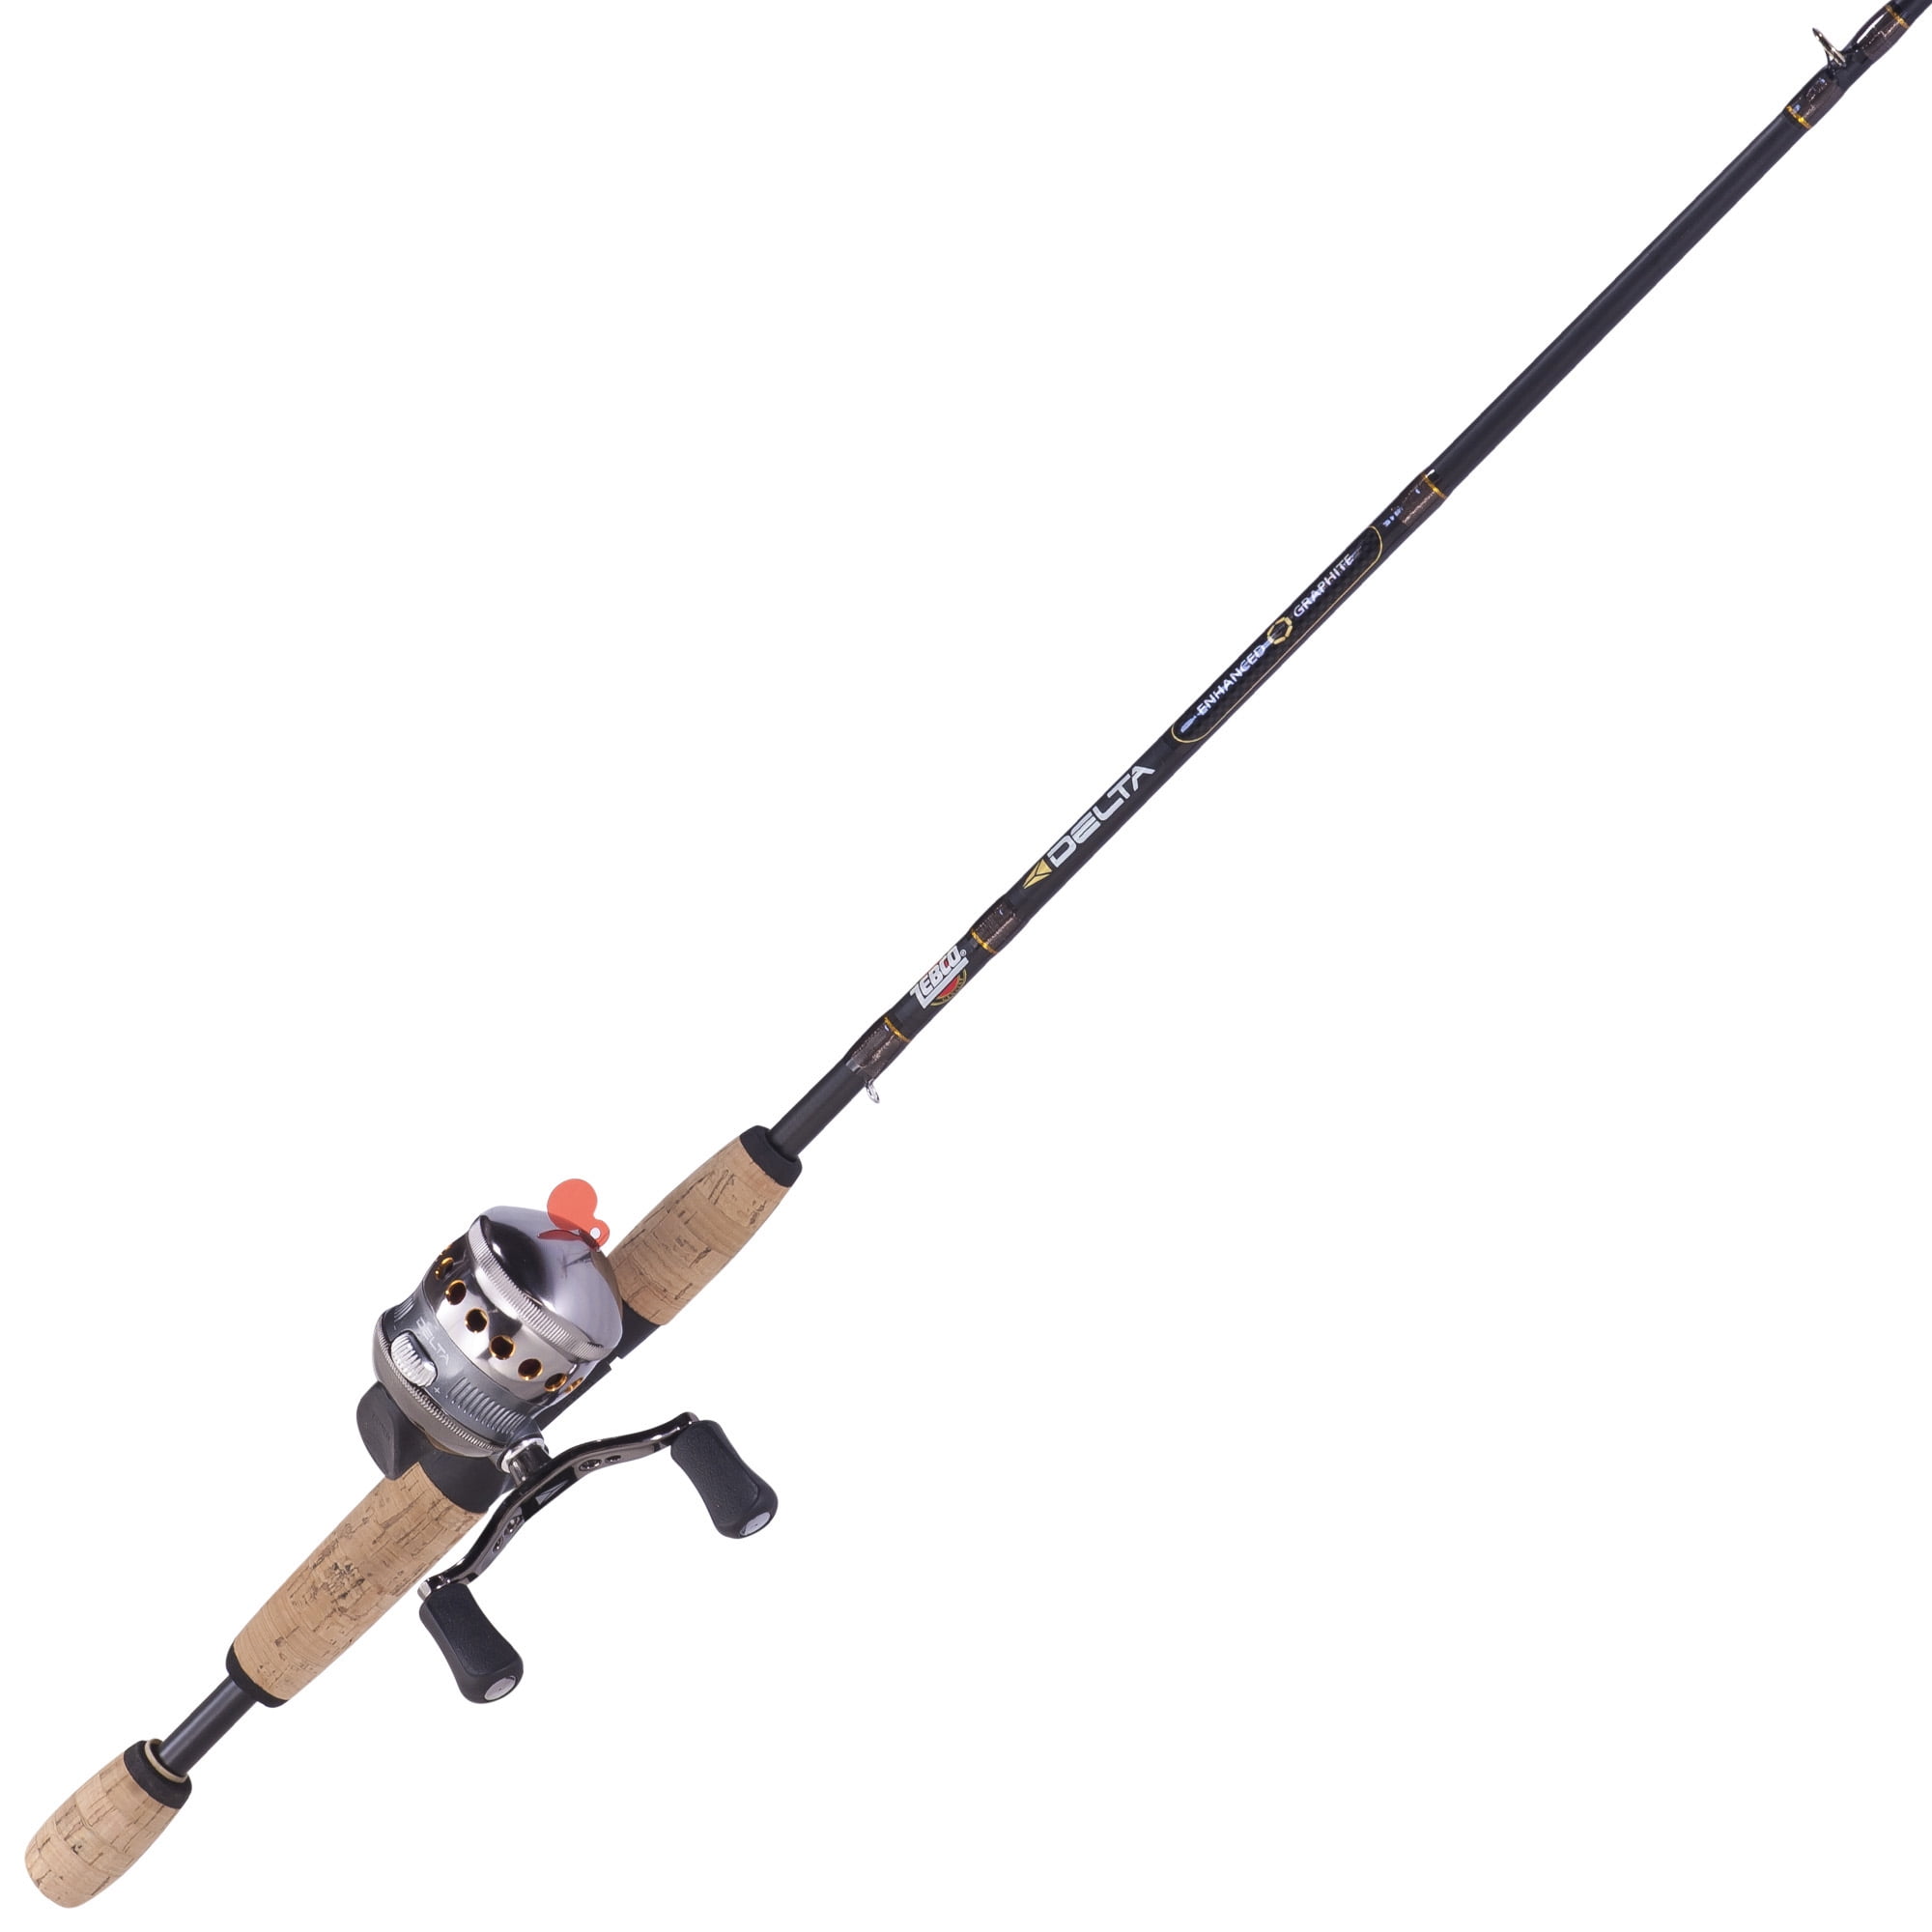 Zebco Delta Spincast Reel and Fishing Rod Combo, 5-Foot 6-Inch 2-Piece  Graphite Fishing Pole with Split-Grip Cork Handle, Instant Anti-Reverse  Fishing